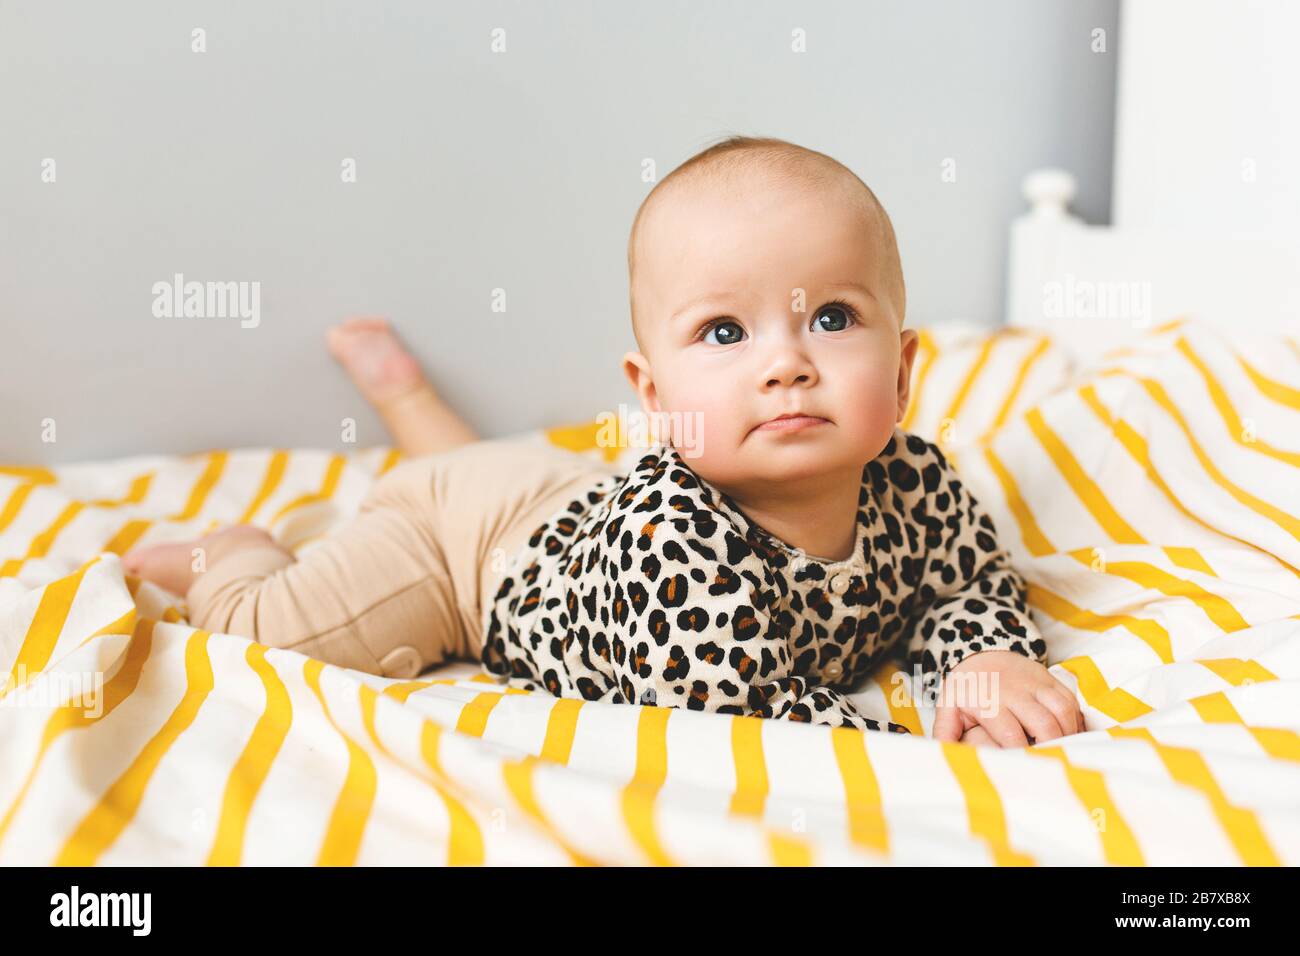 Happy baby with cute smile sitting in a cot. Child sitting in the bed. Happy childhood. Stock Photo